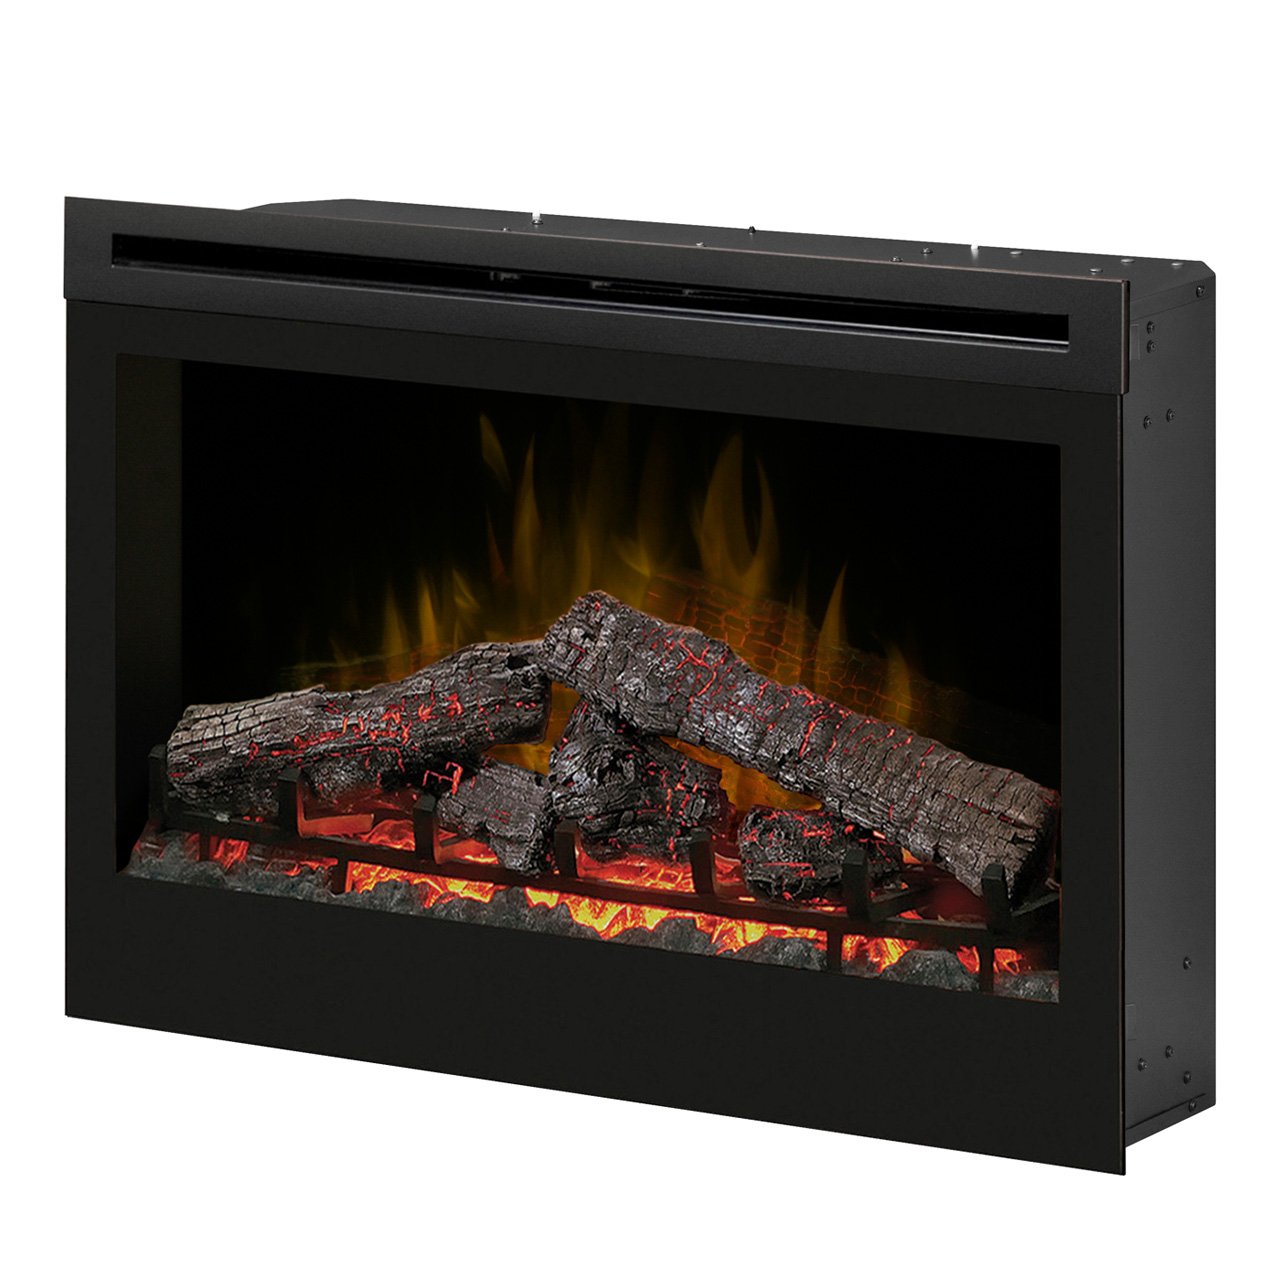 Fireplace Scent Unique Dimplex Df3033st 33 Inch Self Trimming Electric Fireplace Insert